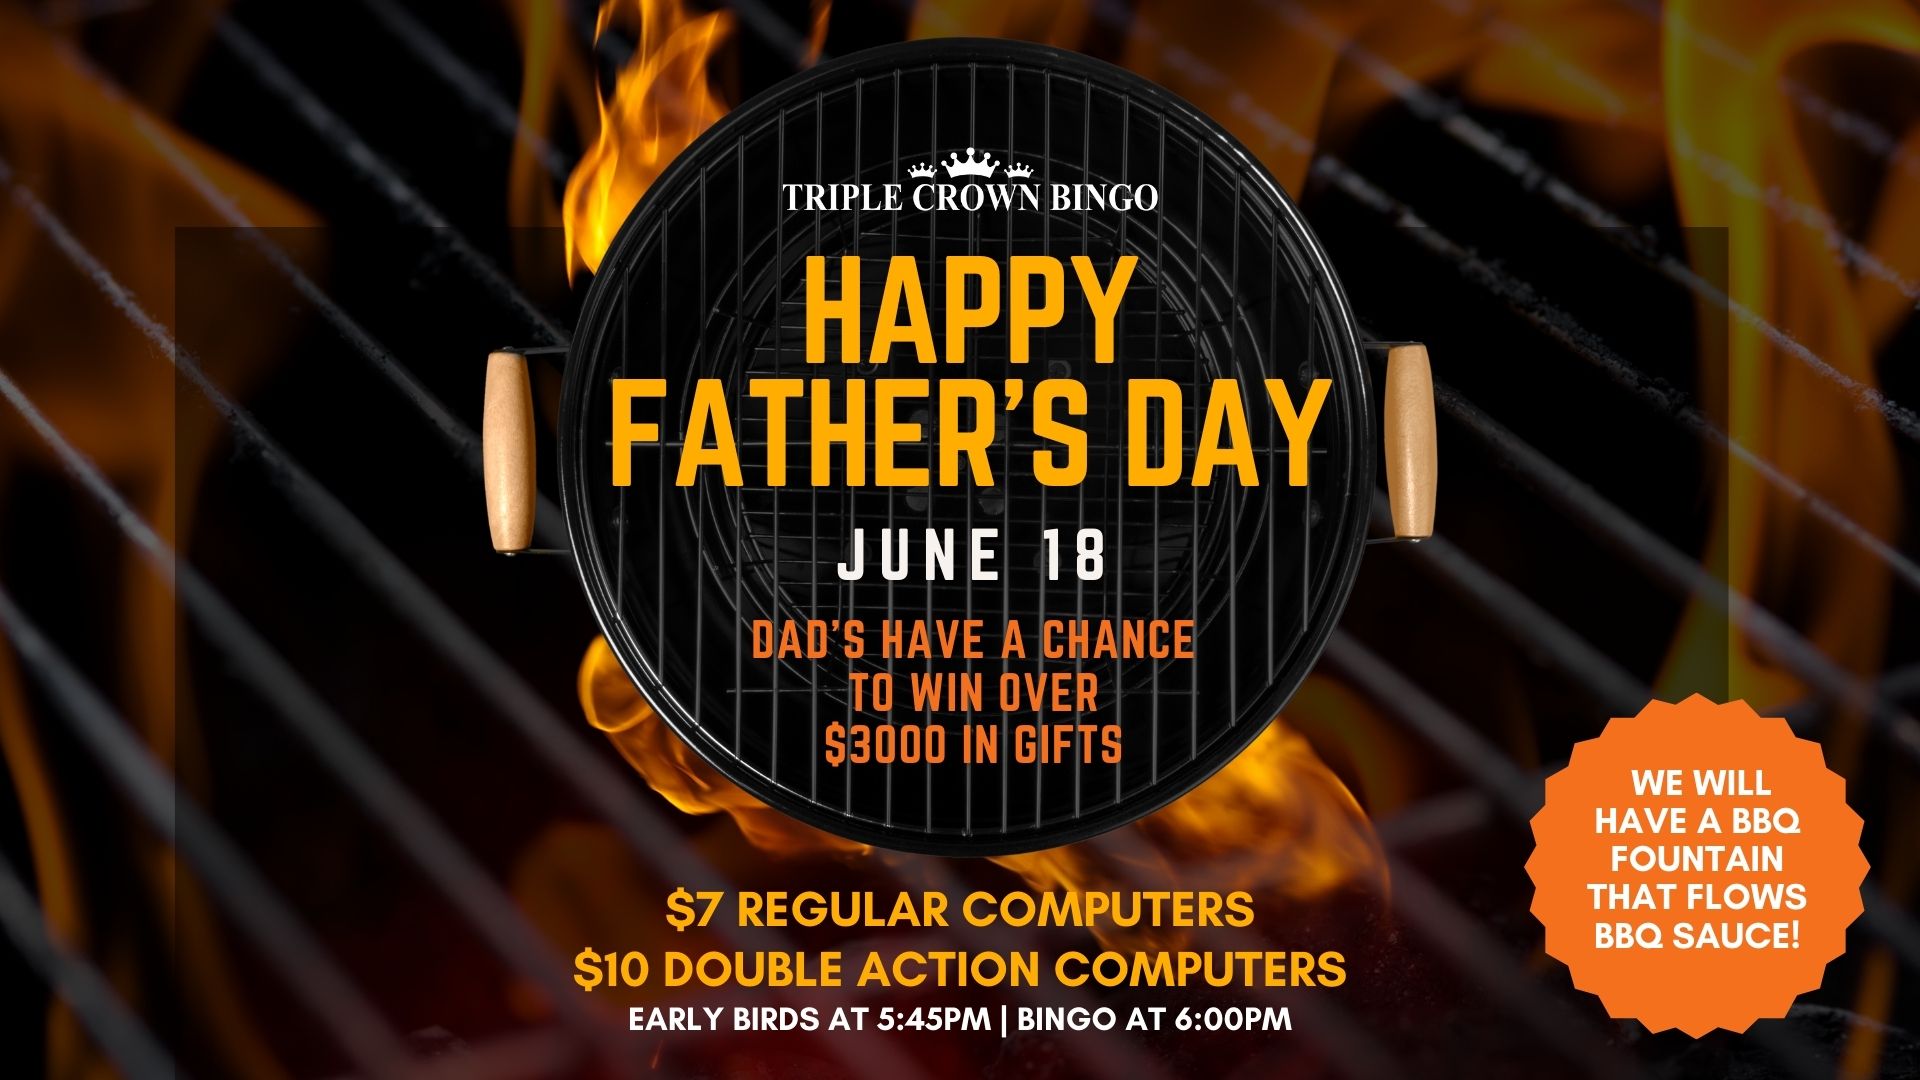  Father’s Day event